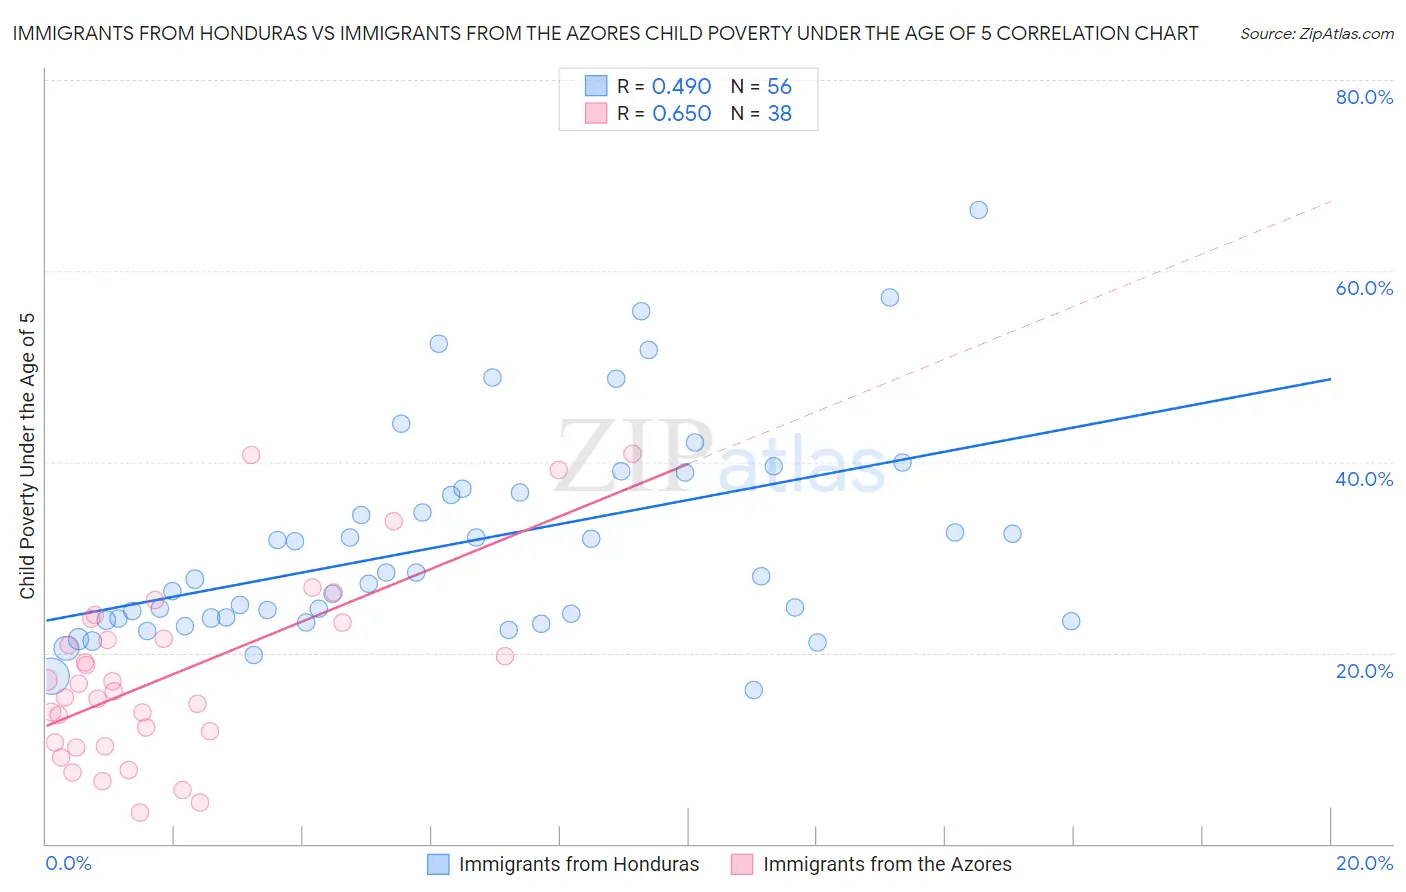 Immigrants from Honduras vs Immigrants from the Azores Child Poverty Under the Age of 5